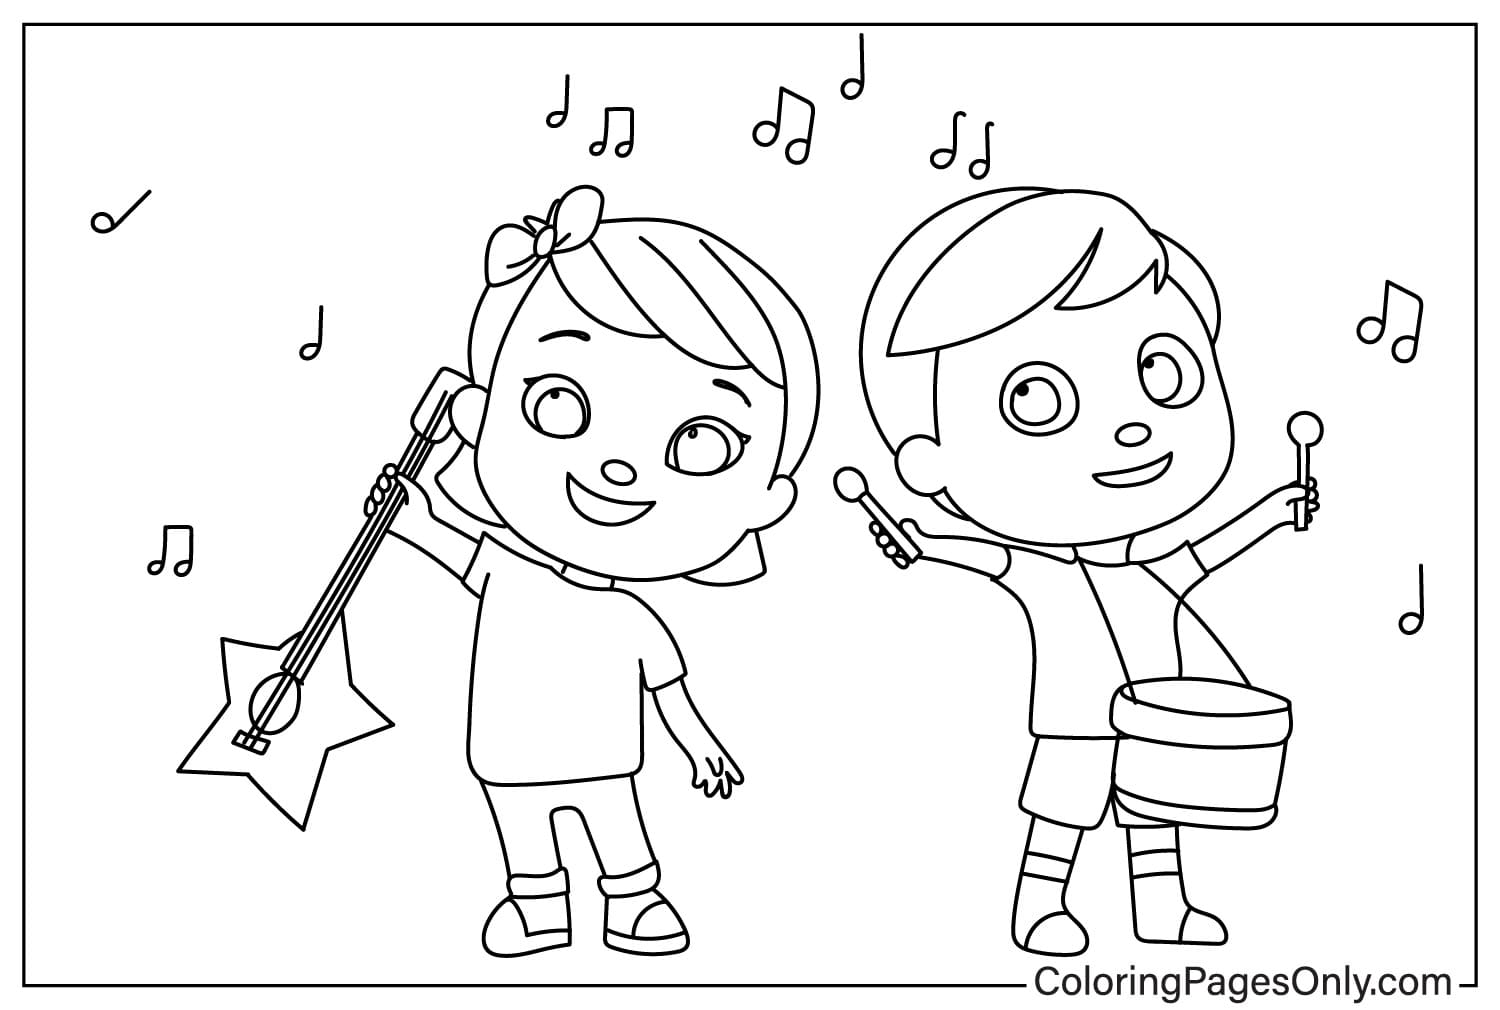 Mia and Jacus Play Musical Instruments from Little Baby Bum